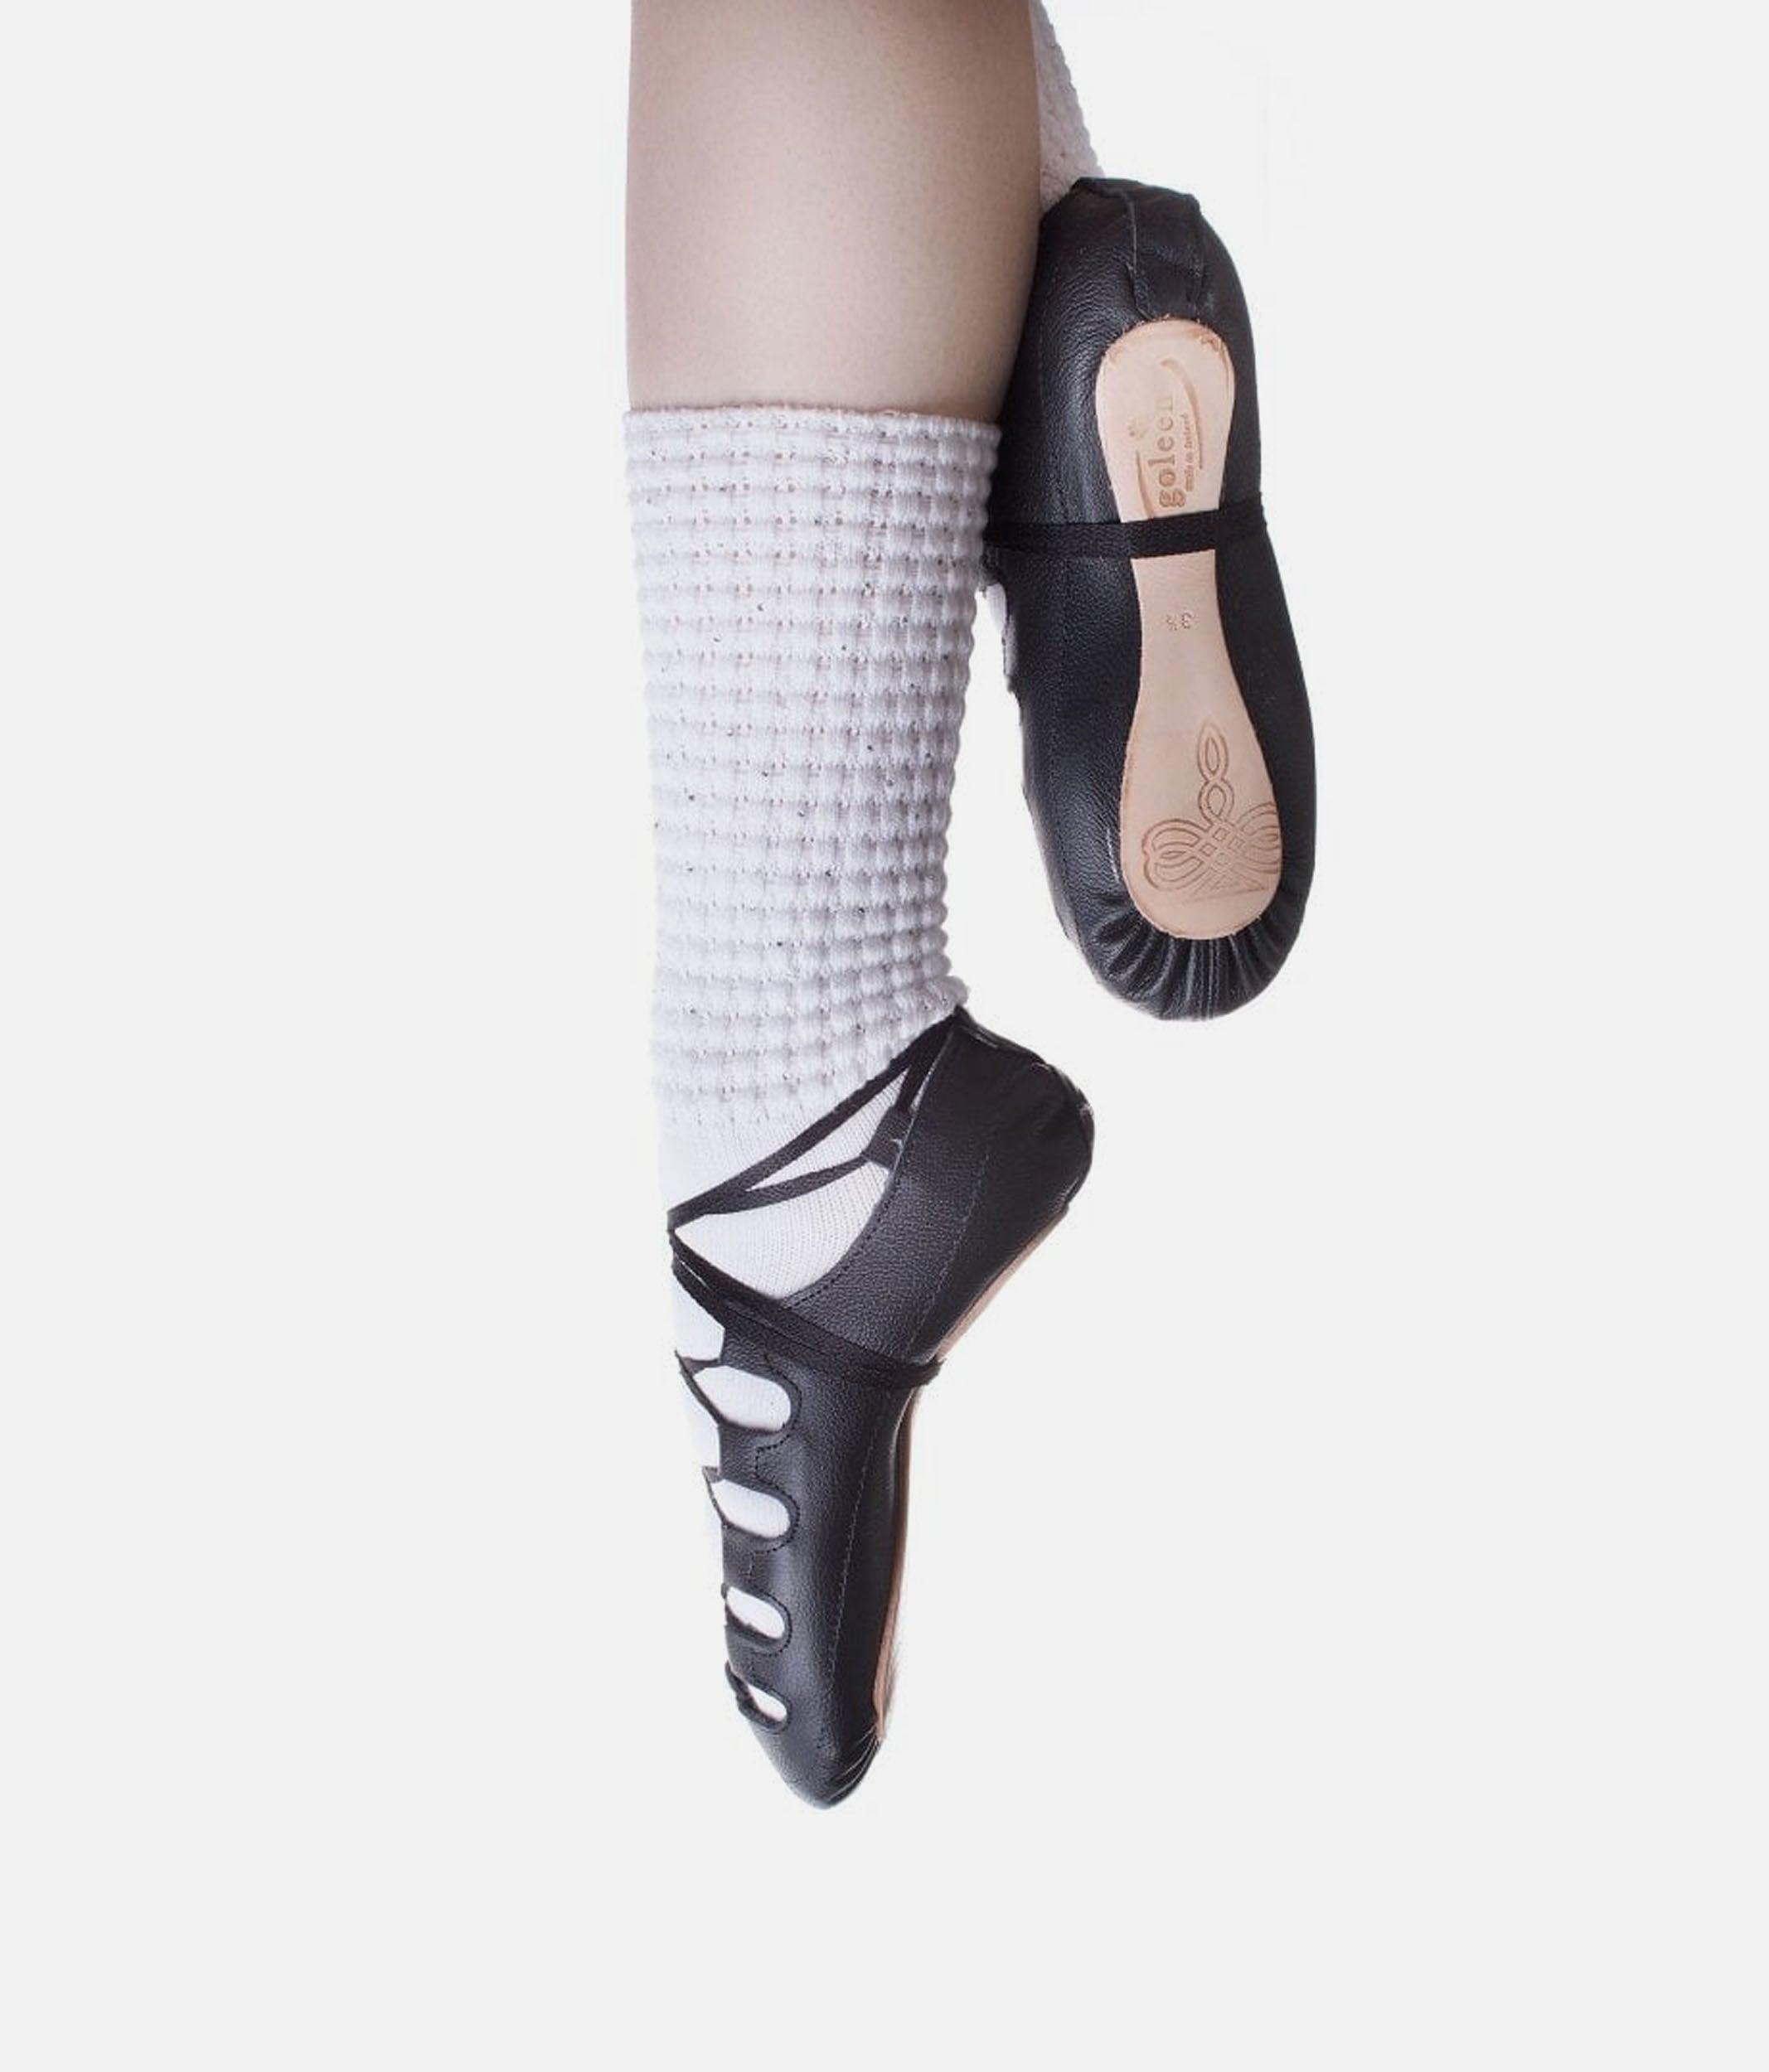 IRISH DANCE SOCKS ANKLE Length Arch Support Seamless Poodle Socks 1 Pair  made UK £8.90 - PicClick UK